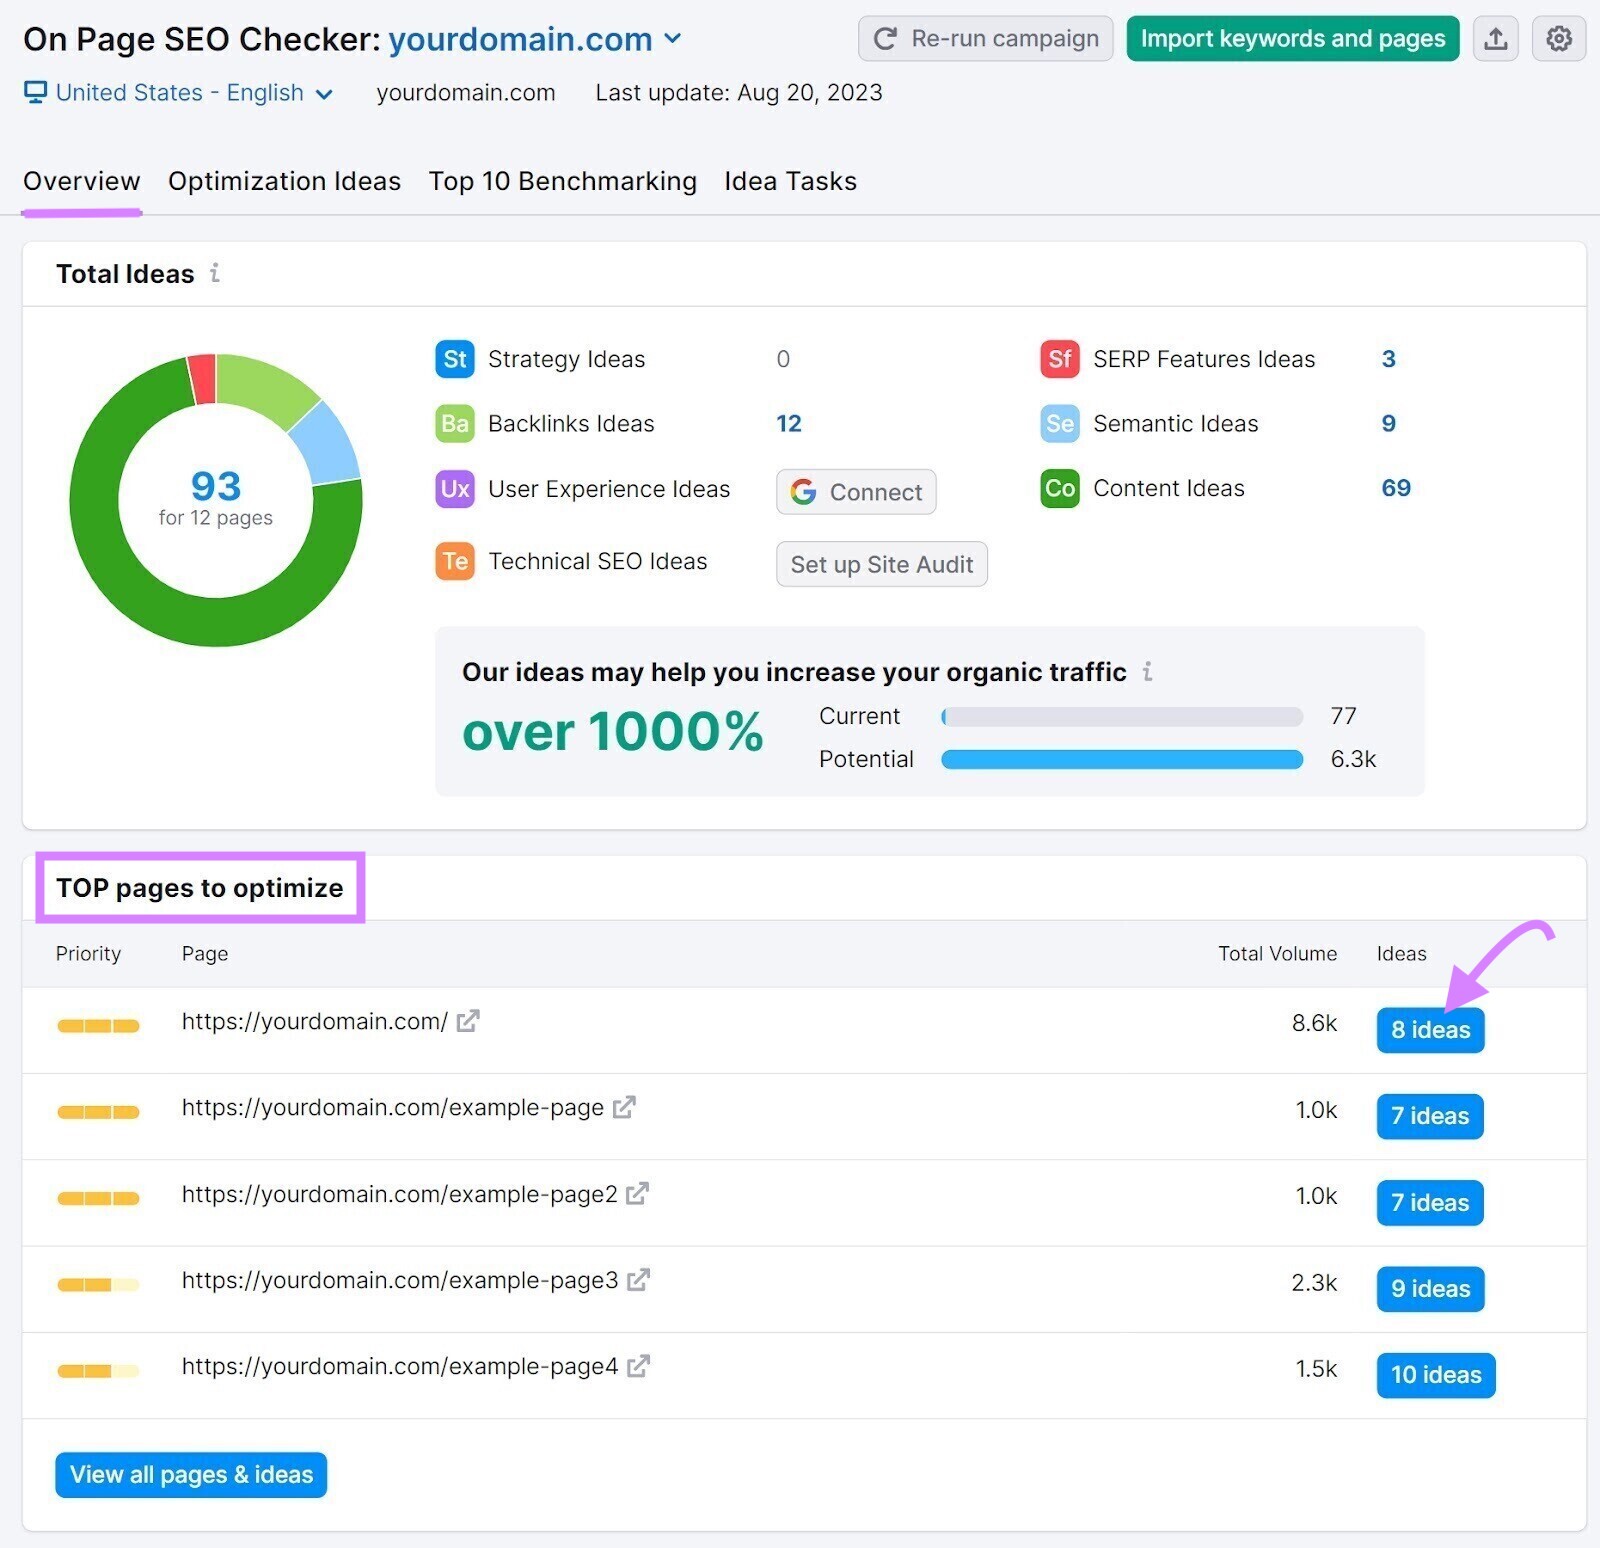 "TOP pages to optimize" section of the overview report